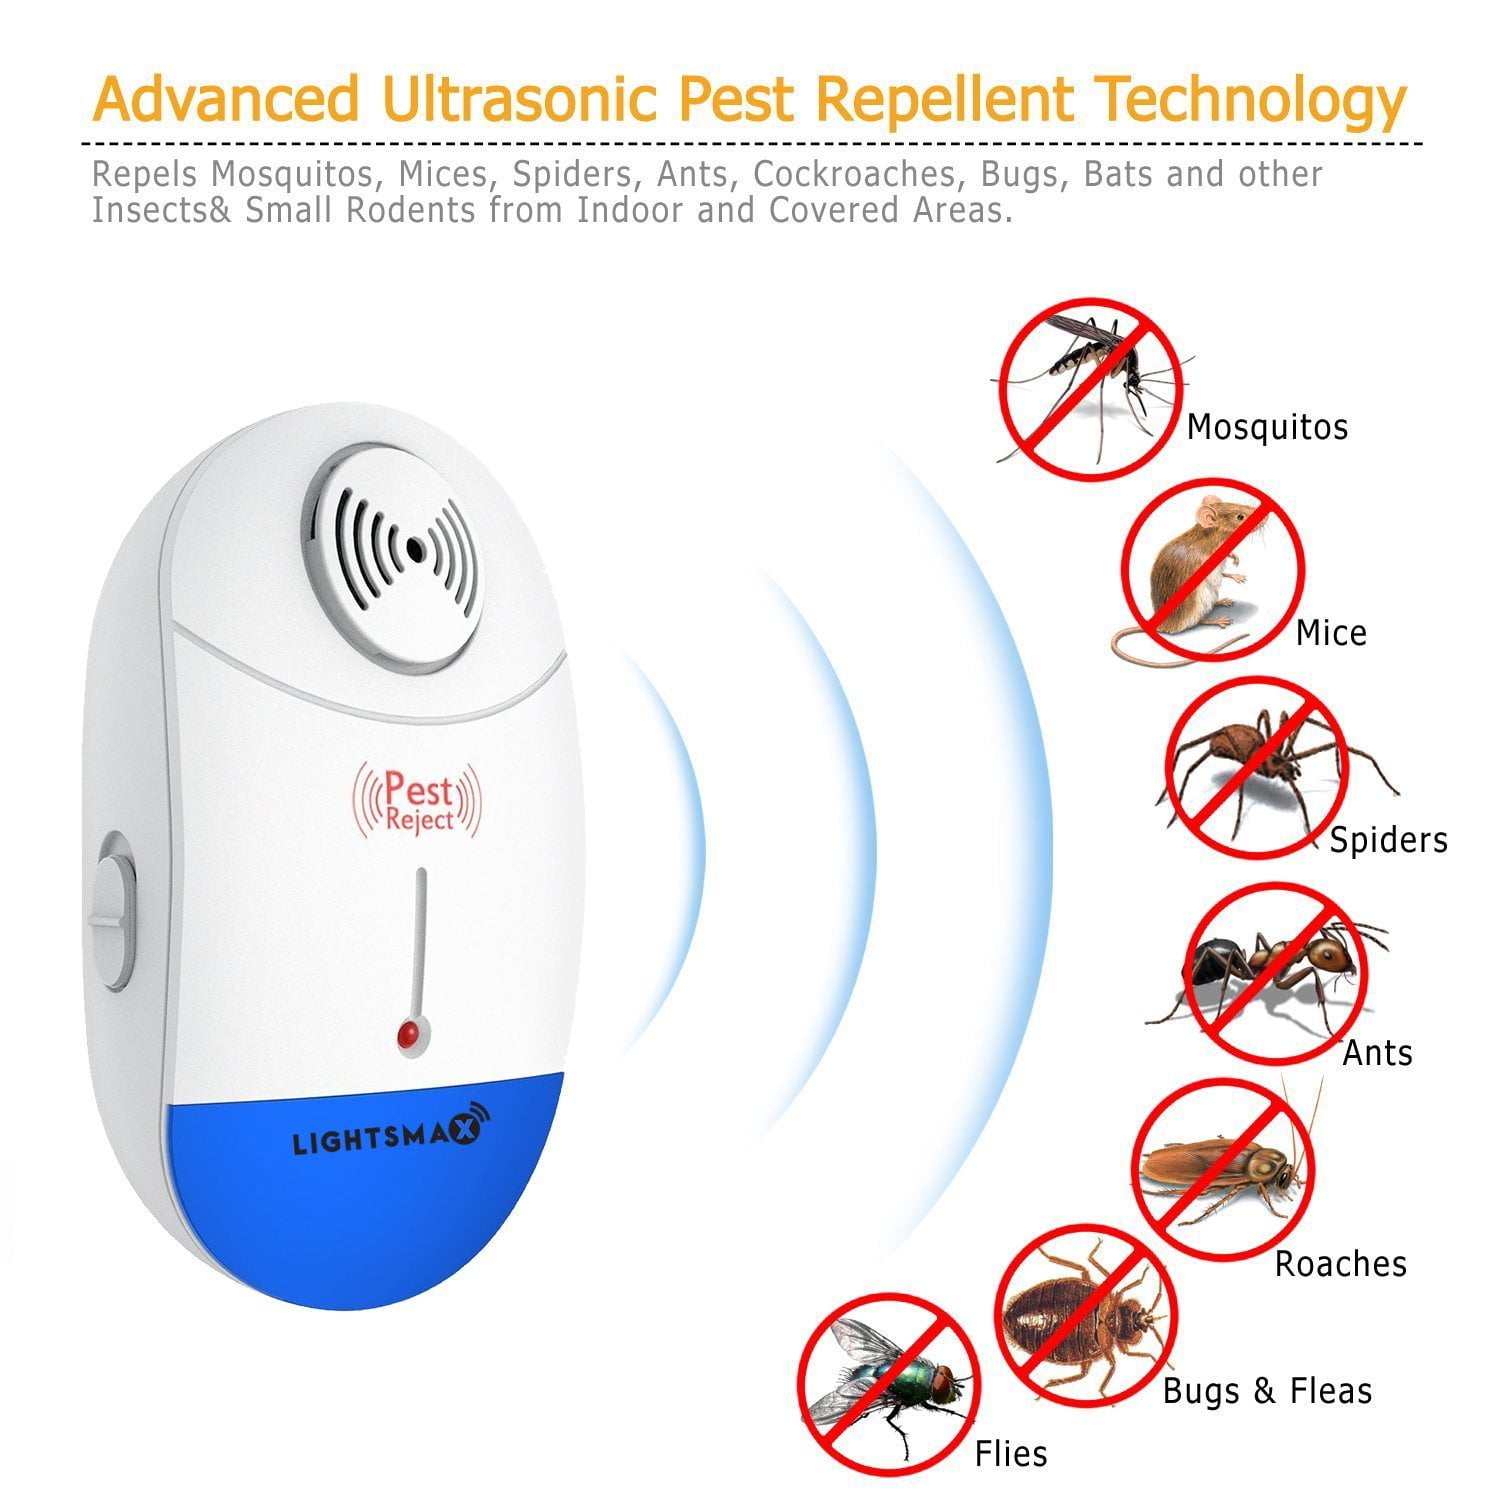 Ultrasonic Pest Repeller Newest Upgraded Plug in Indoor Electronic Pest Repellent Control for Mice Insects Spiders Bugs and More Mosquitoes Rats Ants Fleas Cockroaches 